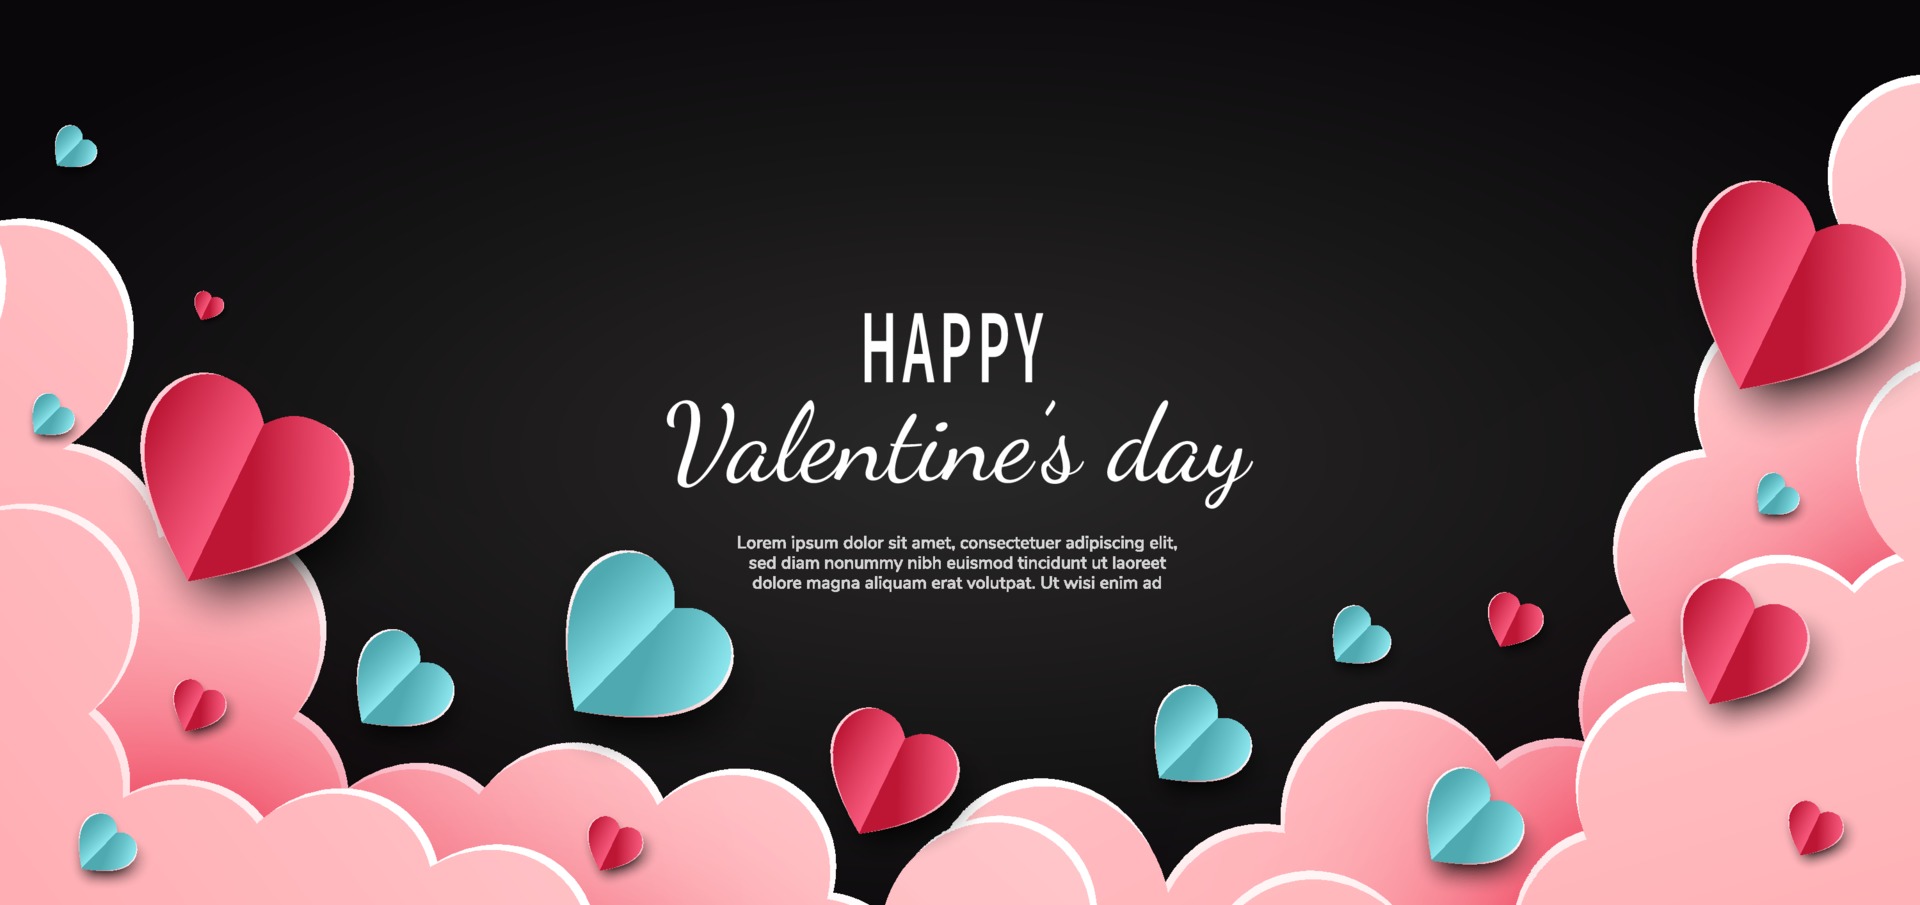 999+ Incredible Valentine Images - Extensive Collection of Full 4K ...